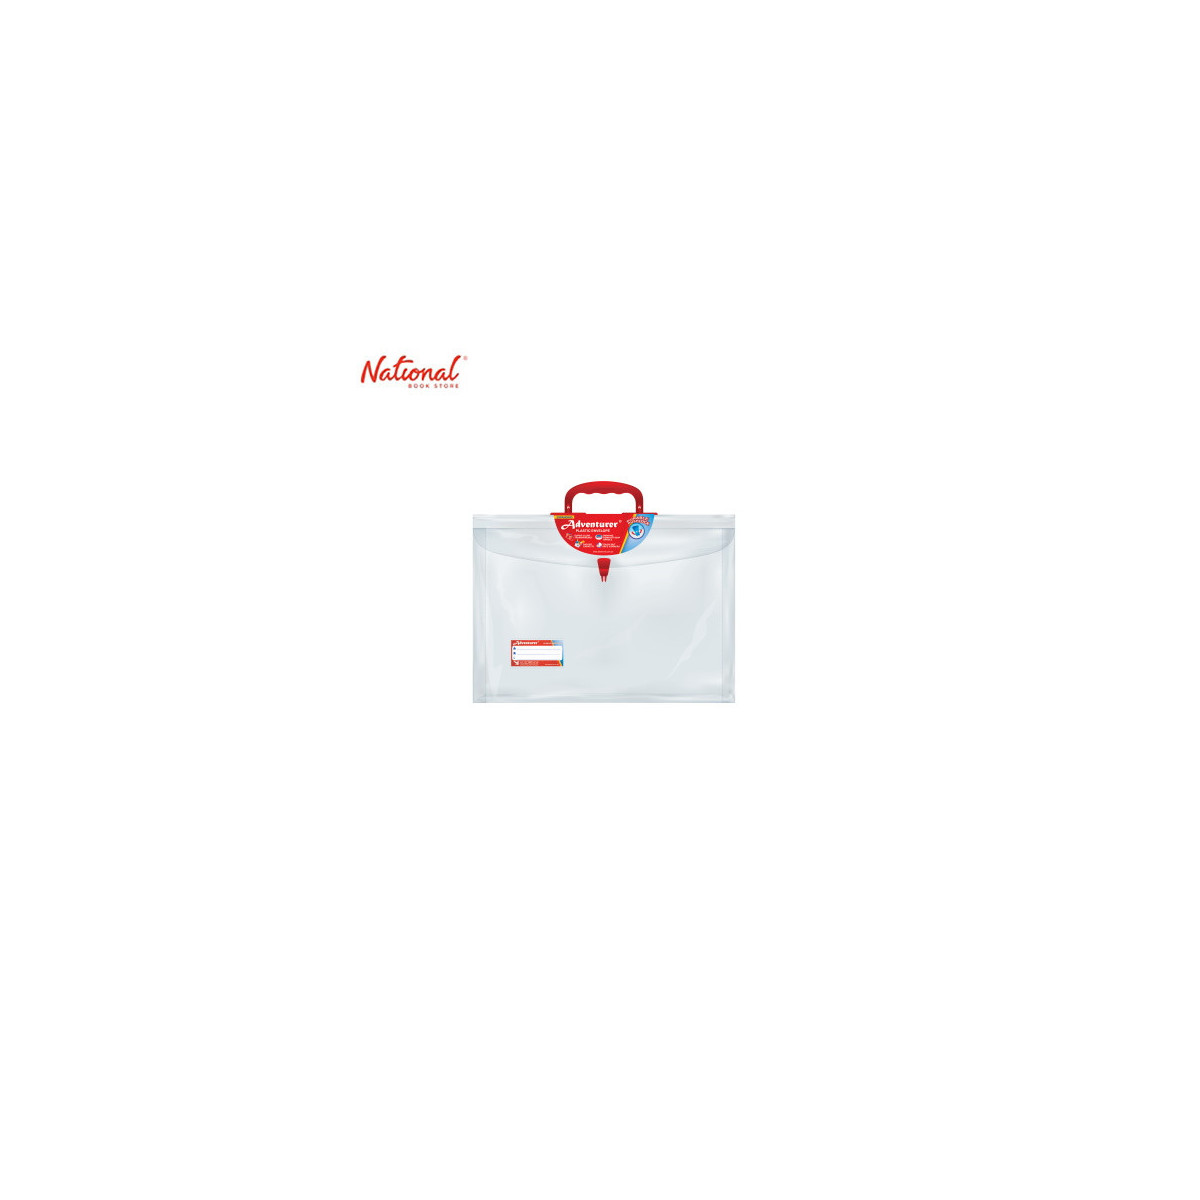 ADVENTURER PLASTIC ENVELOPE EXPANDING WITH HANDLE E21LWH  LONG COLORED HANDLE PUSH LOCK TRANSPARENT, RED